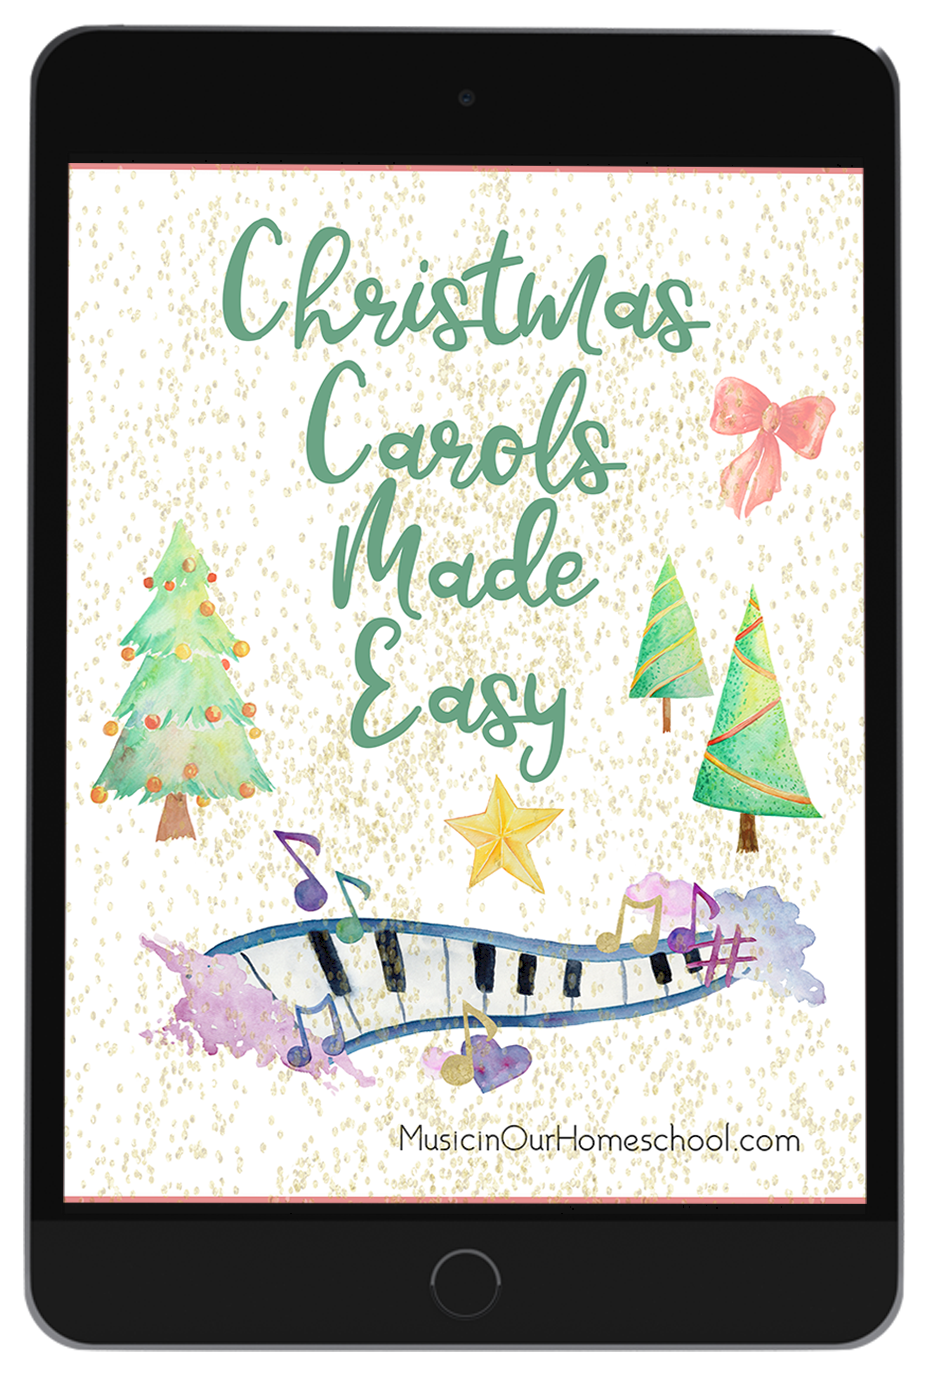 Christmas Carols Made Easy online course for families